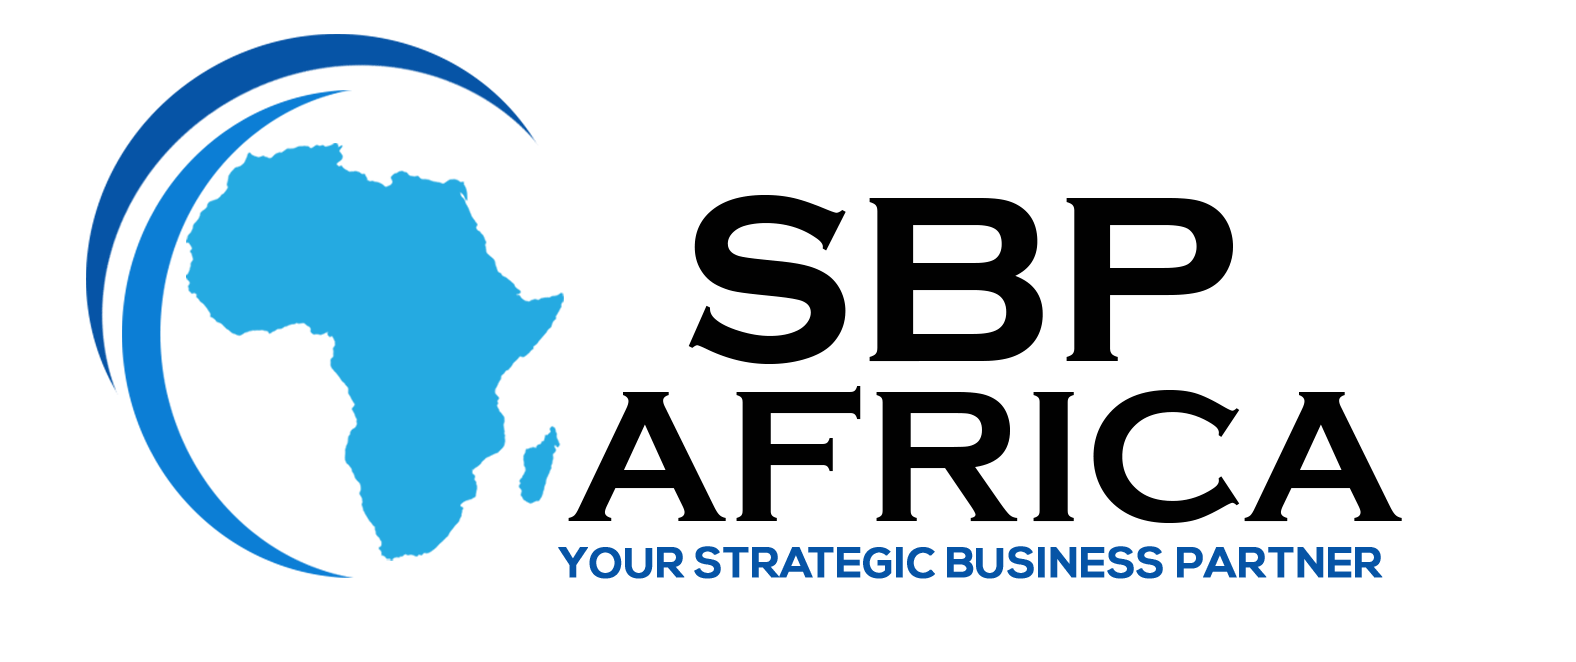 HR Consulting Firms In Ghana | Employee Outsourcing | Payroll Pre Financing Sbp Africa